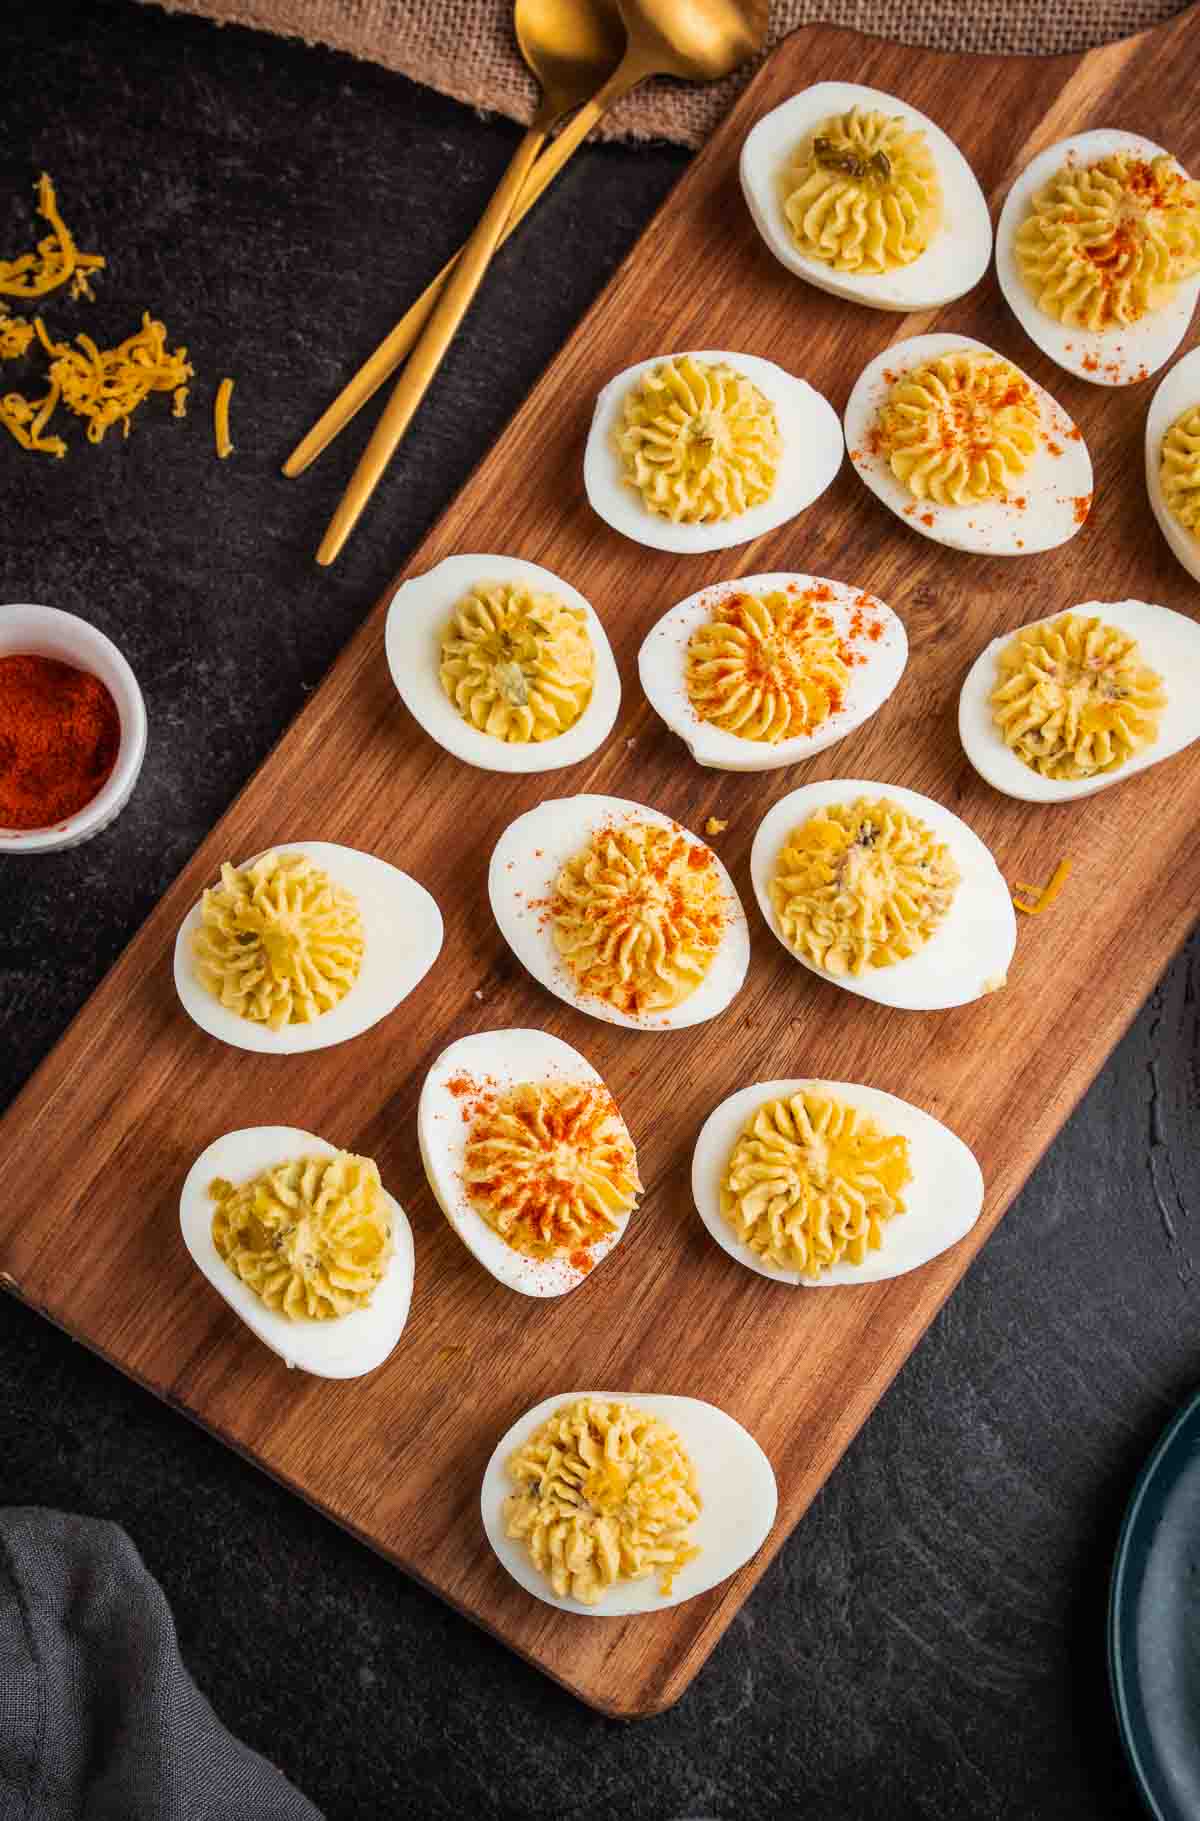 https://passthesushi.com/wp-content/uploads/2022/09/how-to-make-deviled-eggs-with-mayo-or-miracle-whip-31.jpg